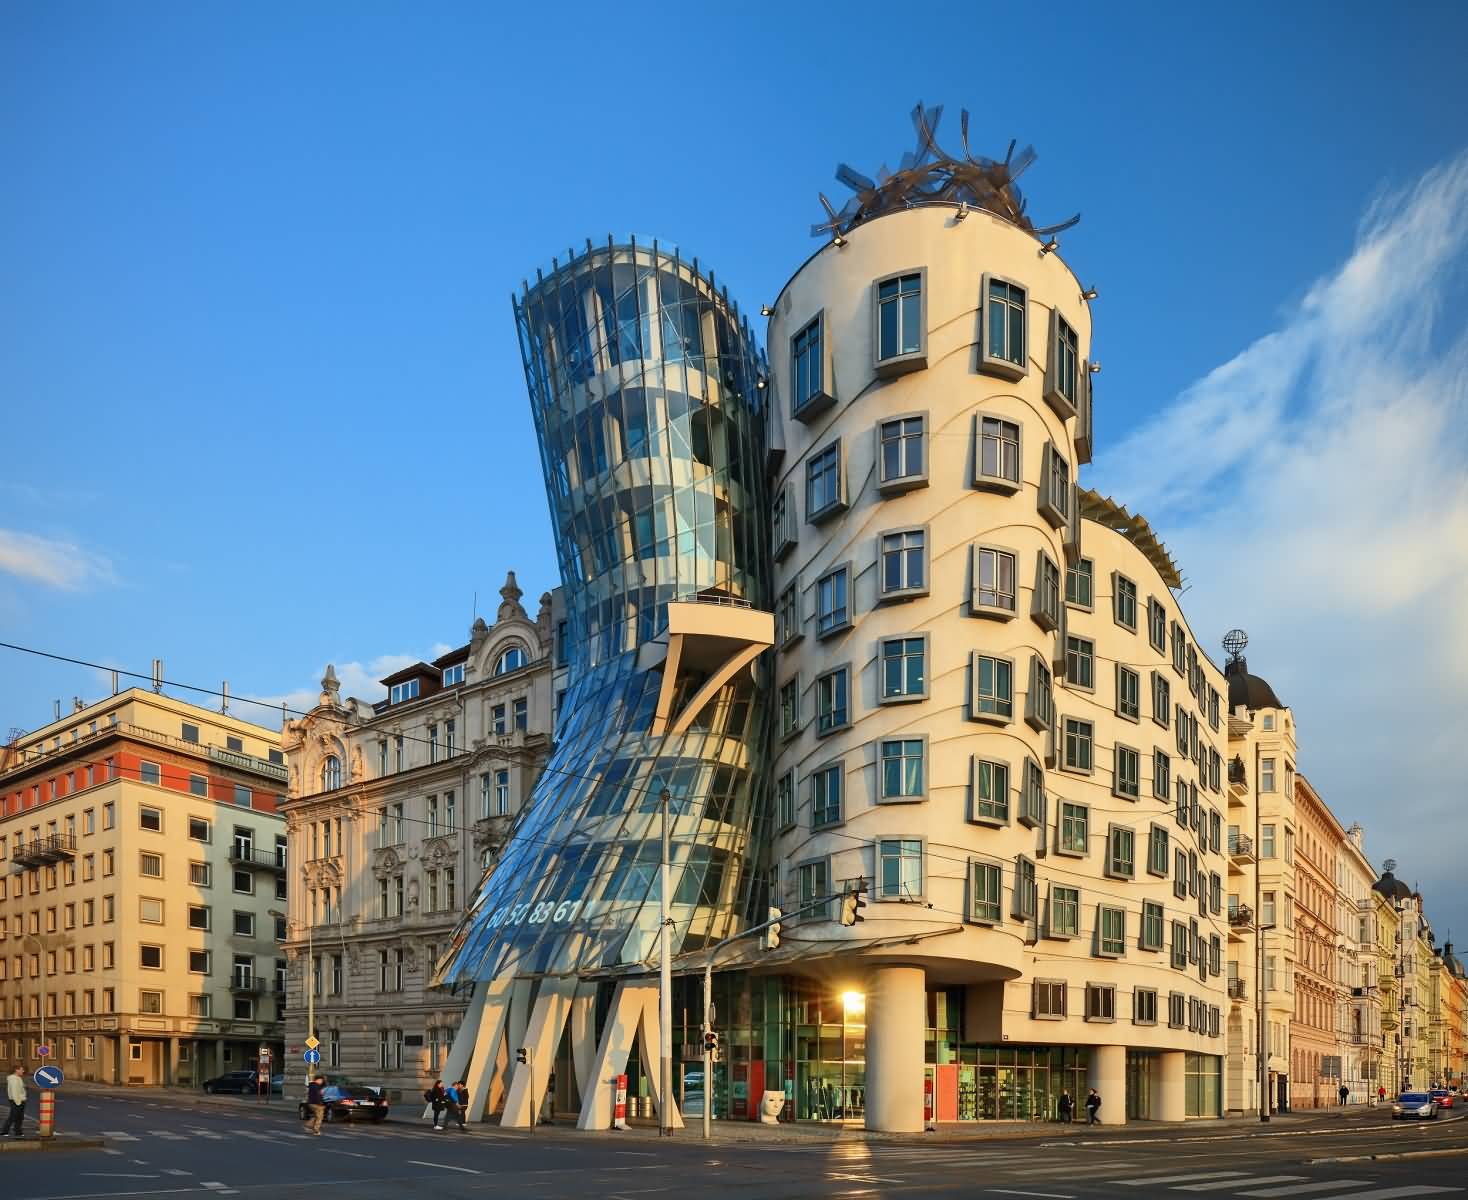 The Dancing House Picture